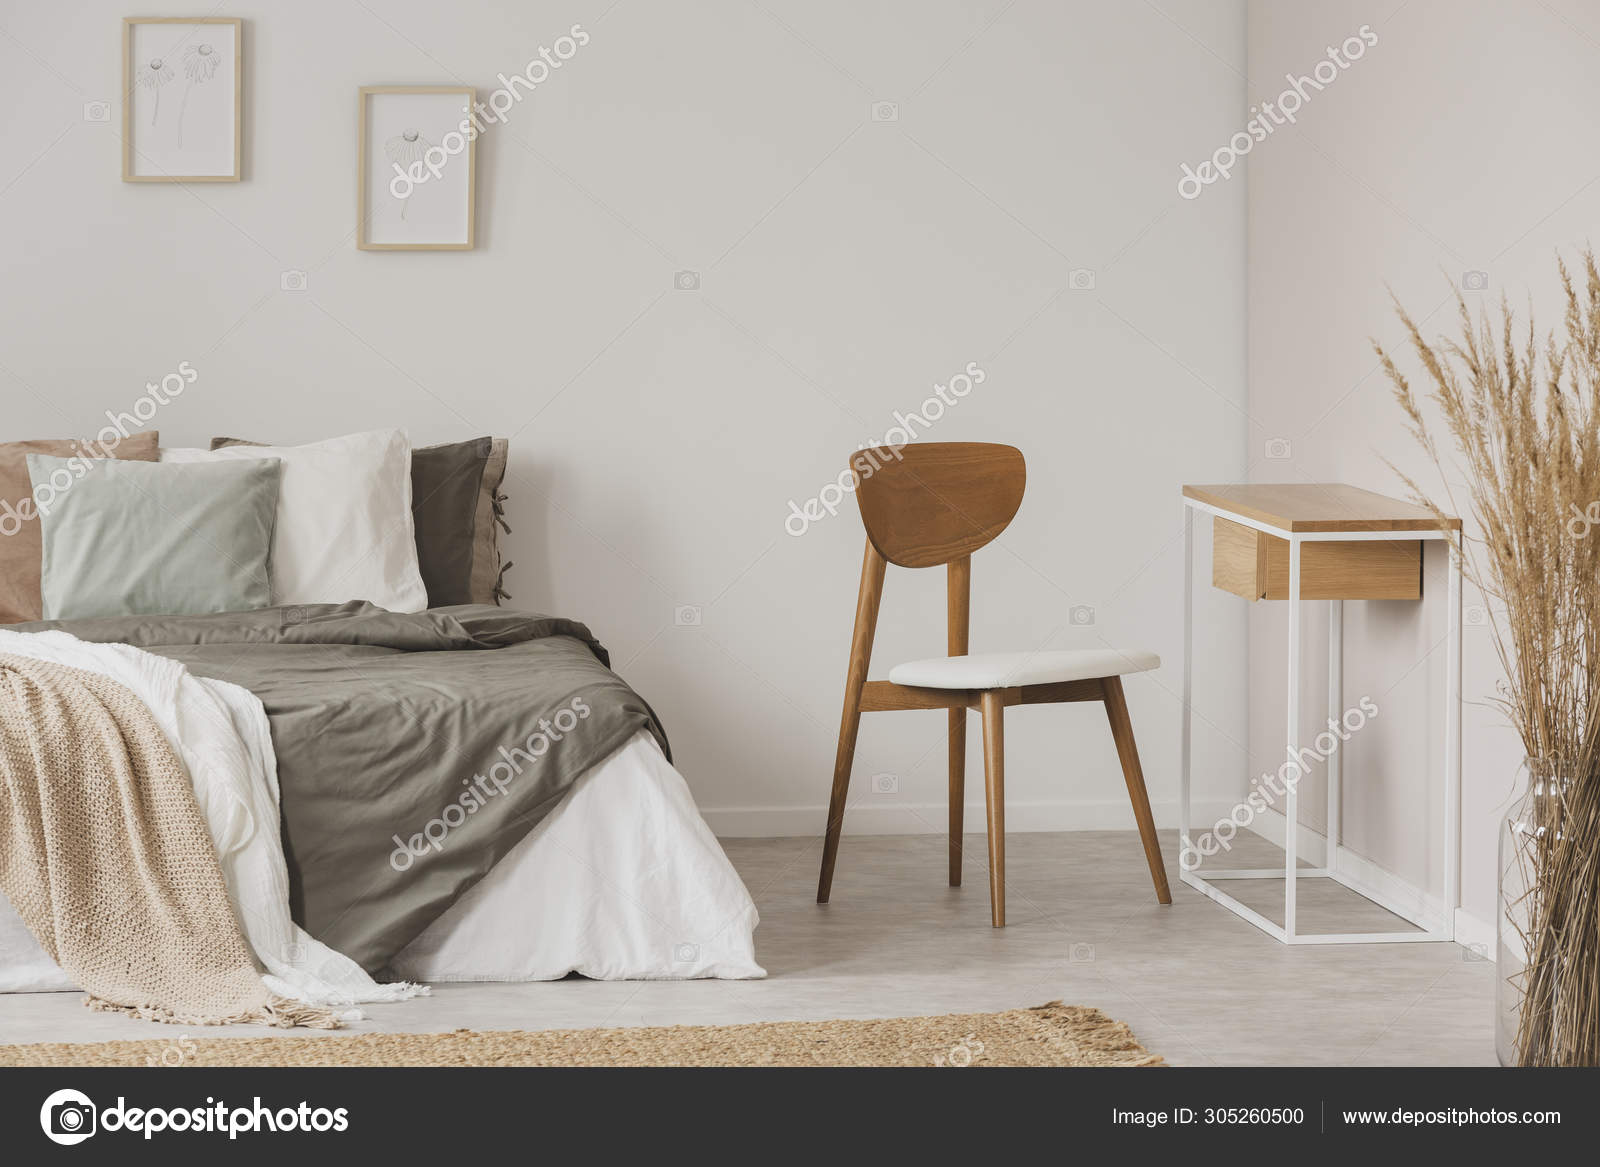 Stylish Chair Next To Warm King Size, King Size Chair Bed